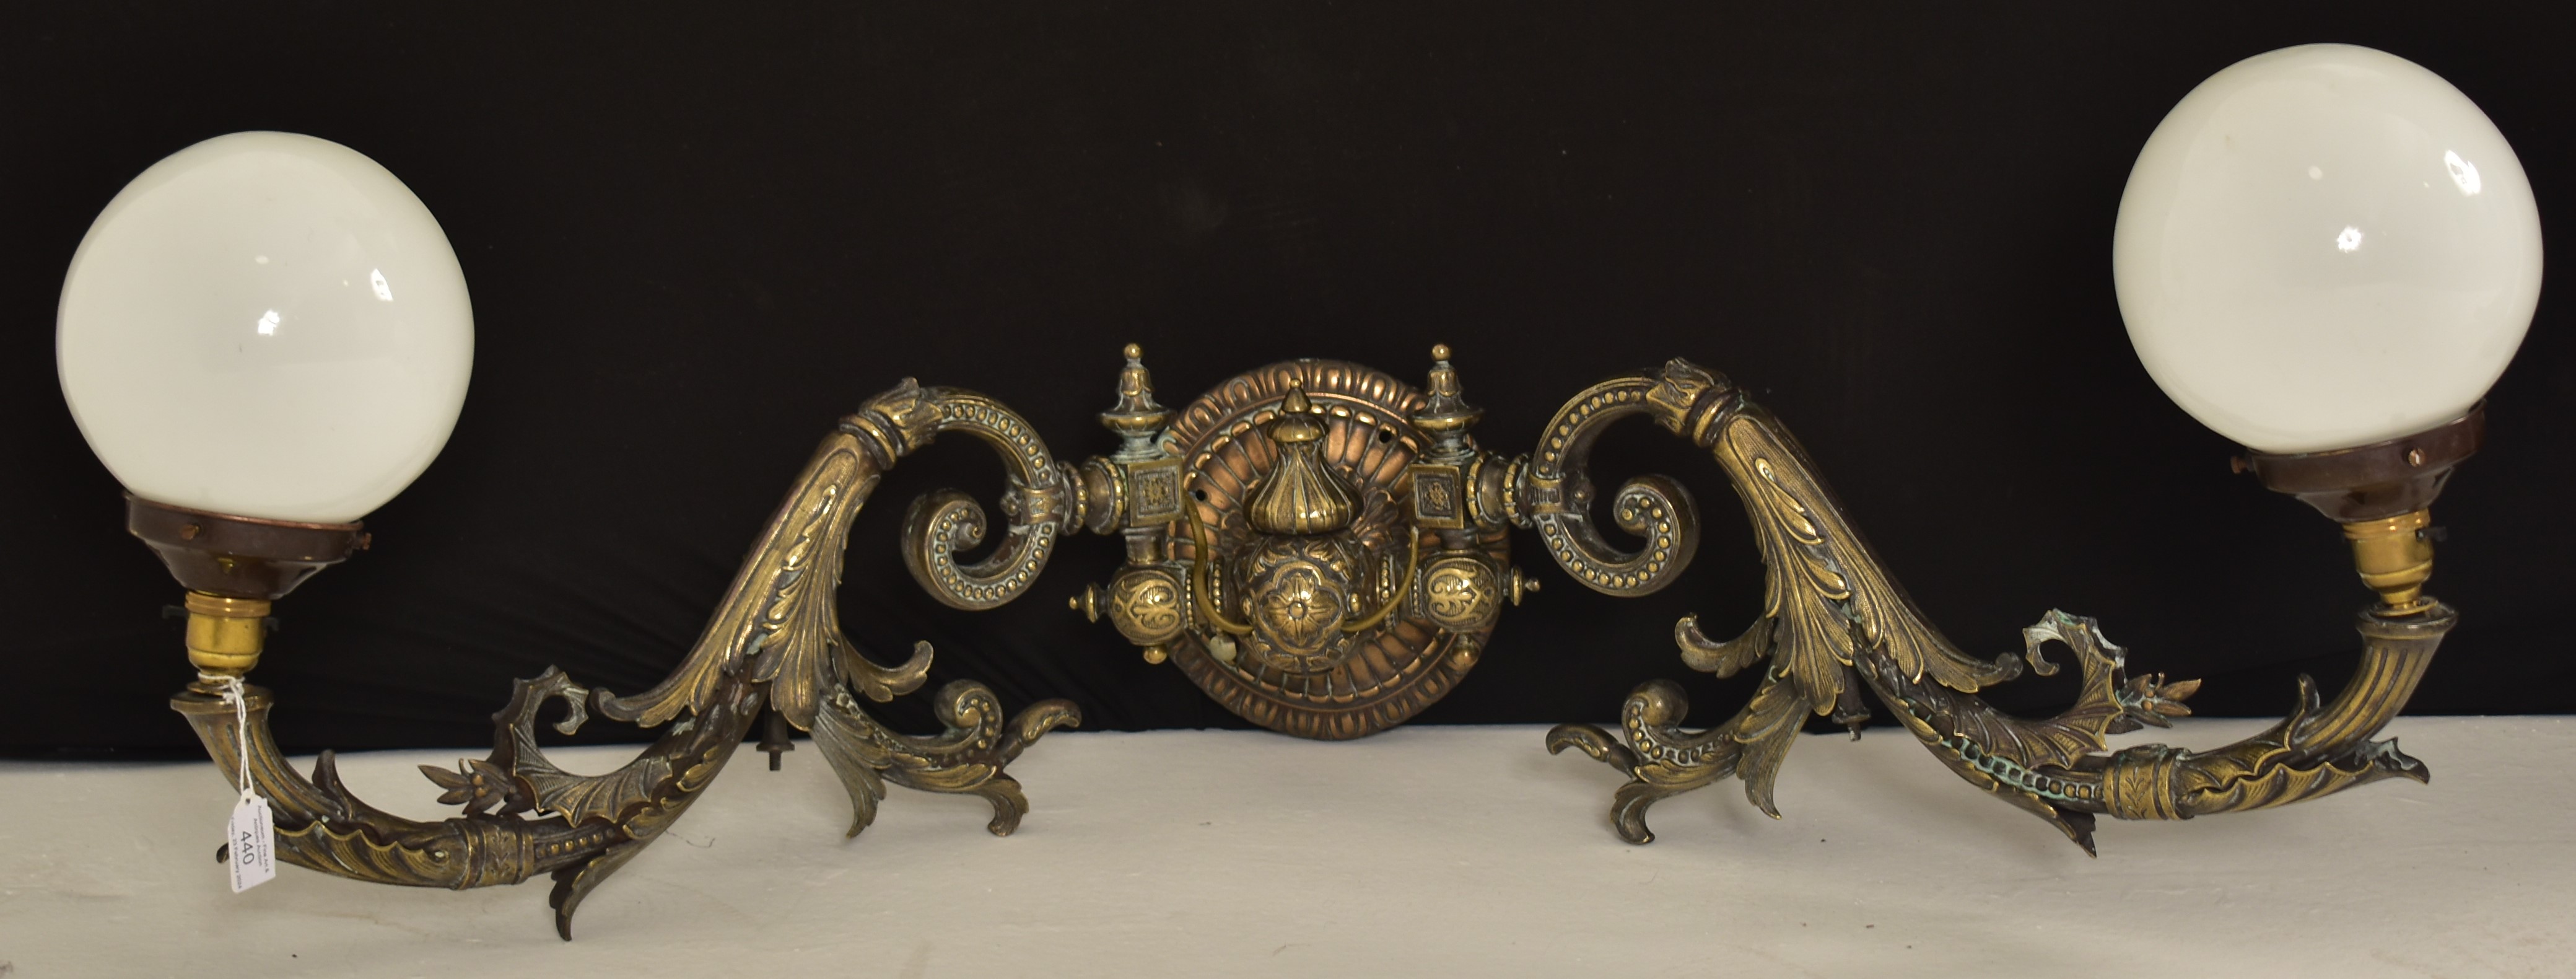 FRENCH ART NOUVEAU CAST METAL TWIN ARM WALL SCONCE - Image 6 of 6